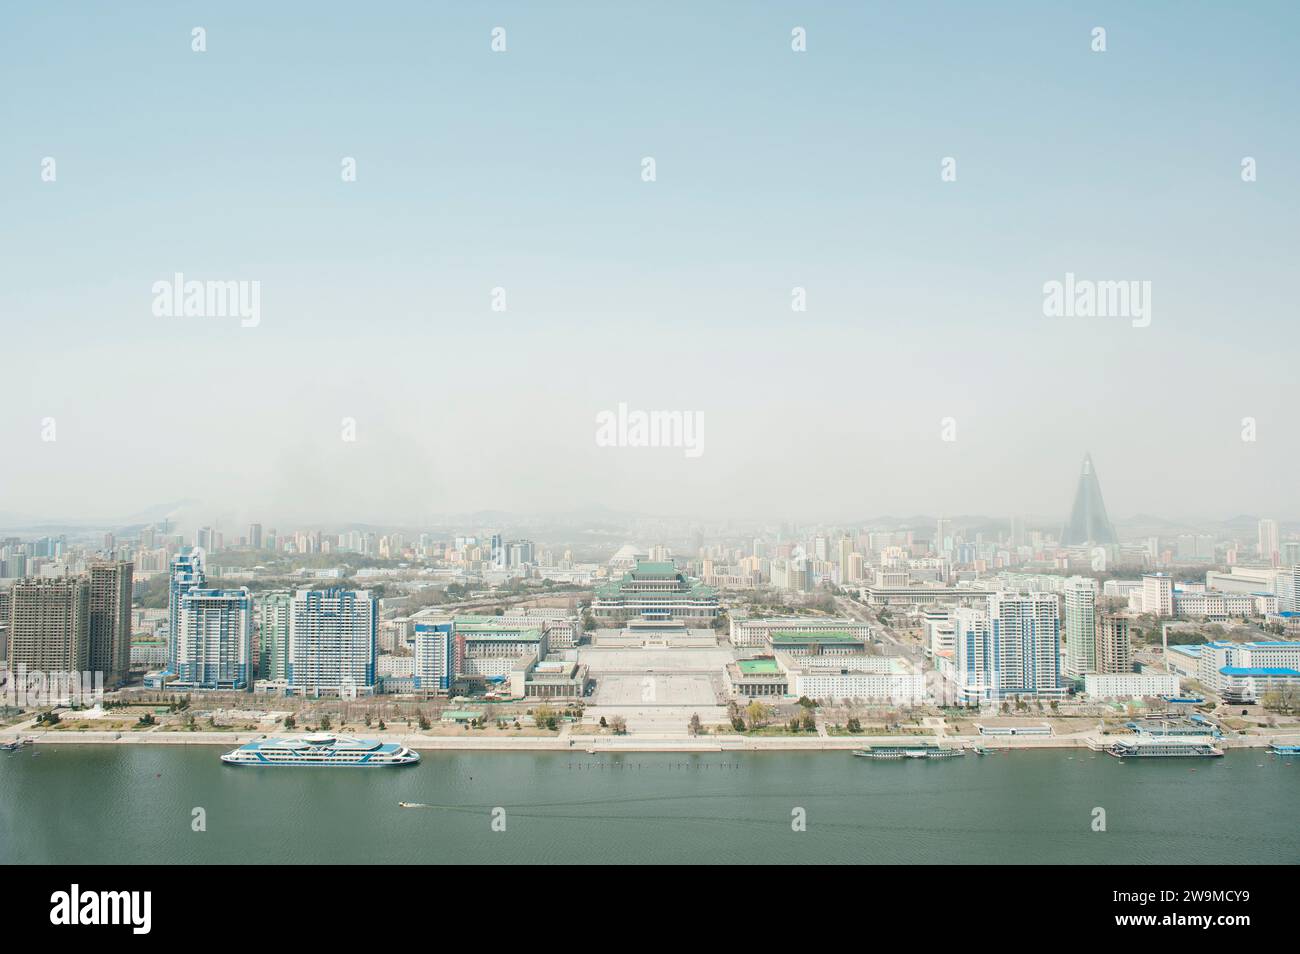 The view of downtown Pyongyang in North Korea from the top of the Juche Tower including the Taedong River, Kim Il Sung Square and the Ryugyong Hotel. Stock Photo